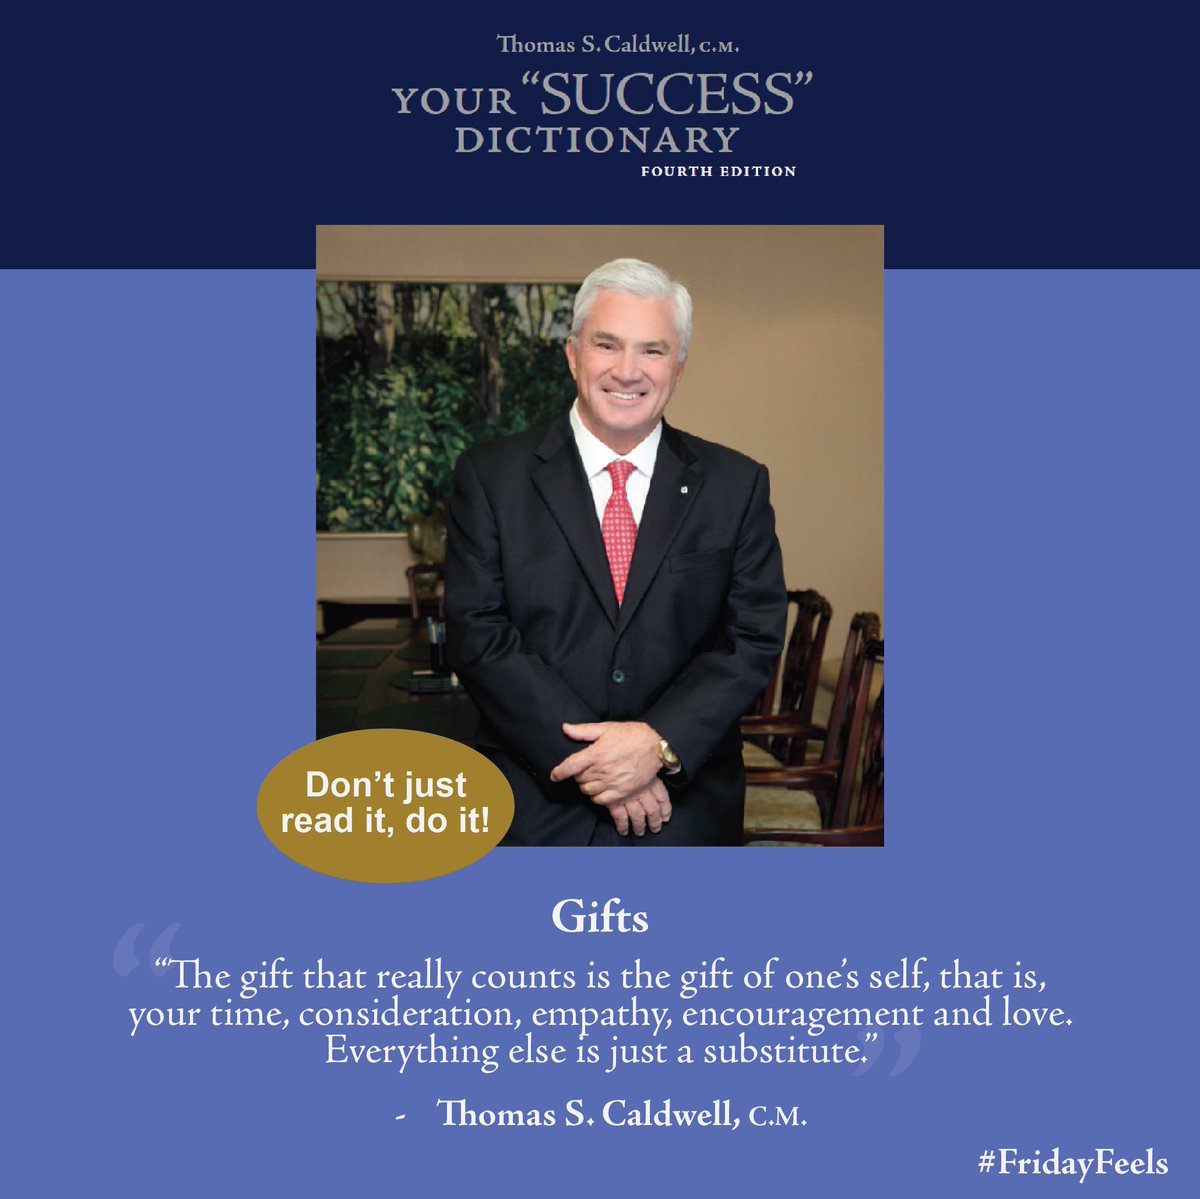 Your #FridayFeels word of the day - #Gifts

#YourSuccessDictionary #ThomasSCaldwell #Friday #Feels #Feeling #Success #SuccessDictionary